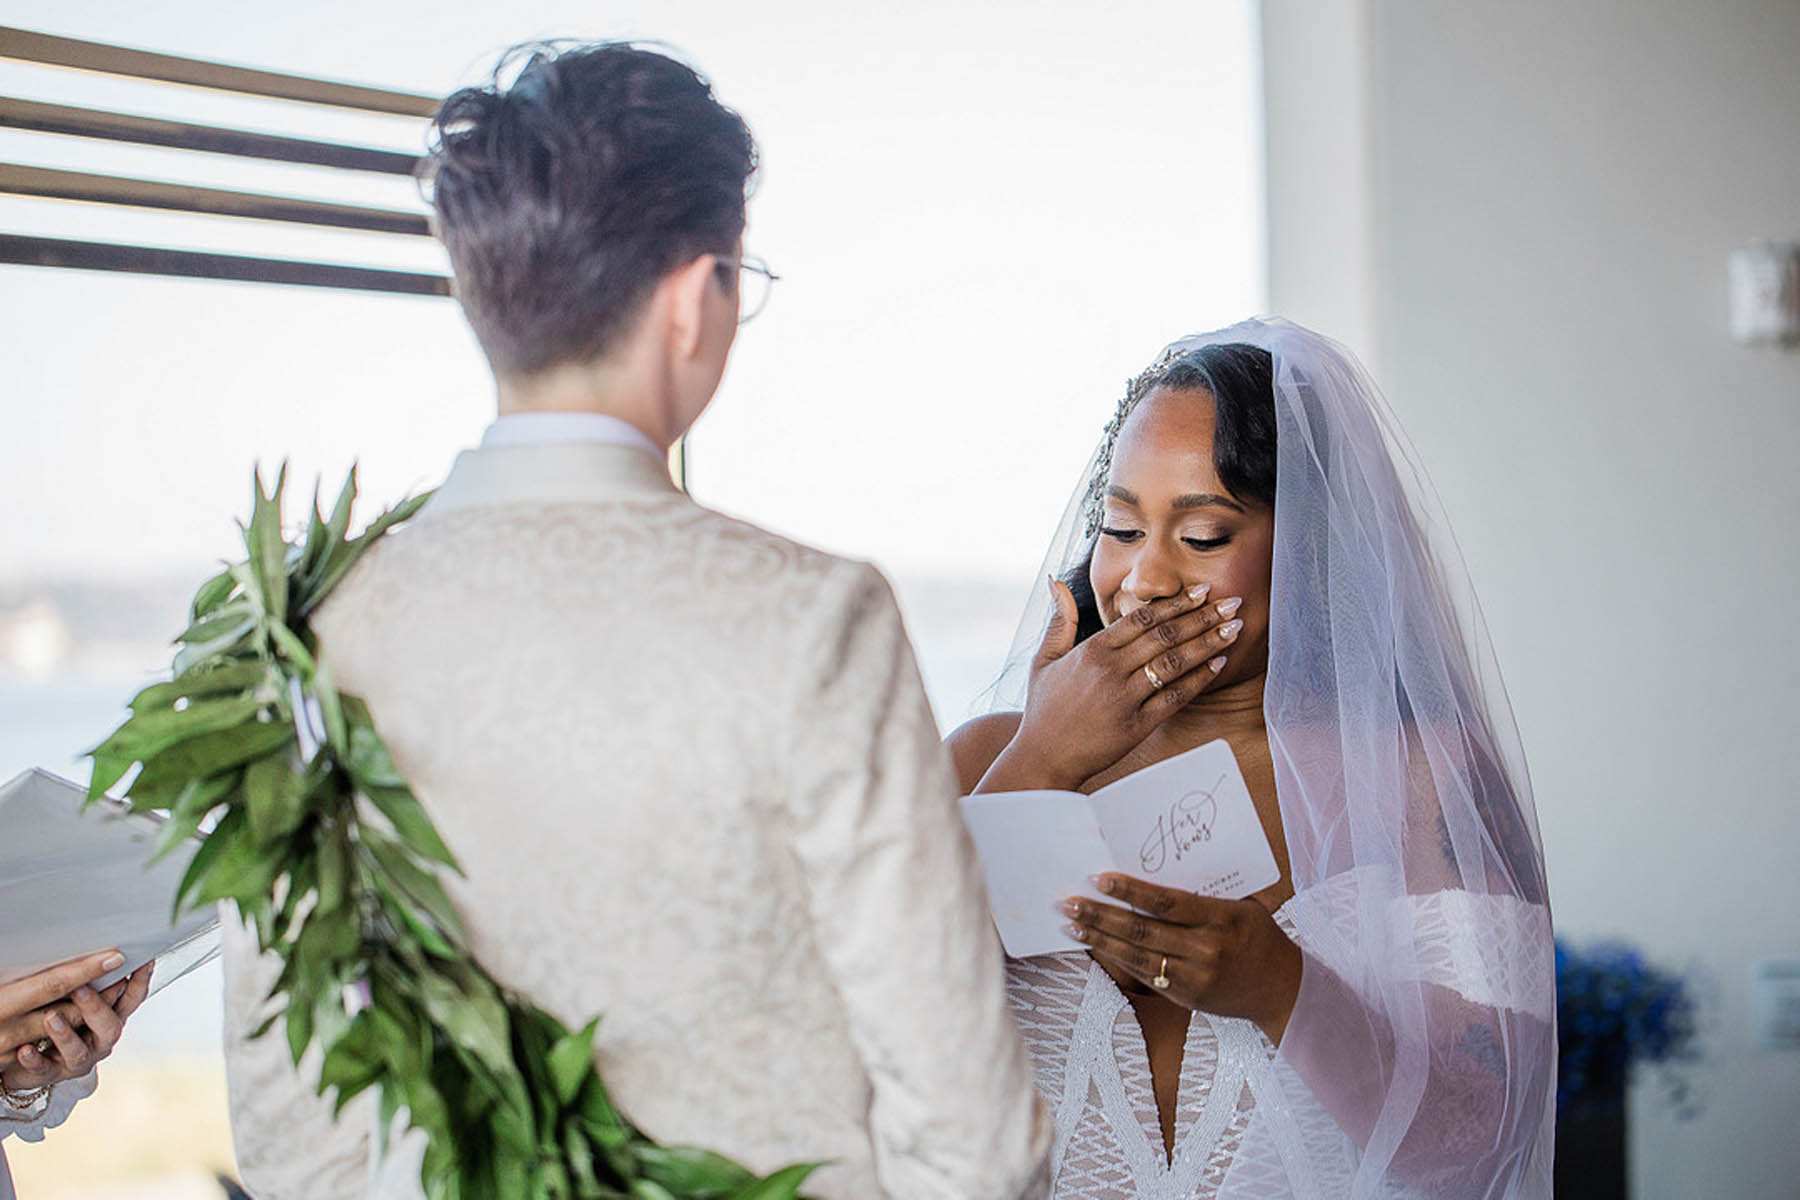 Two brides, one black and one white, stand facing each other in front of a large window, reading vows.